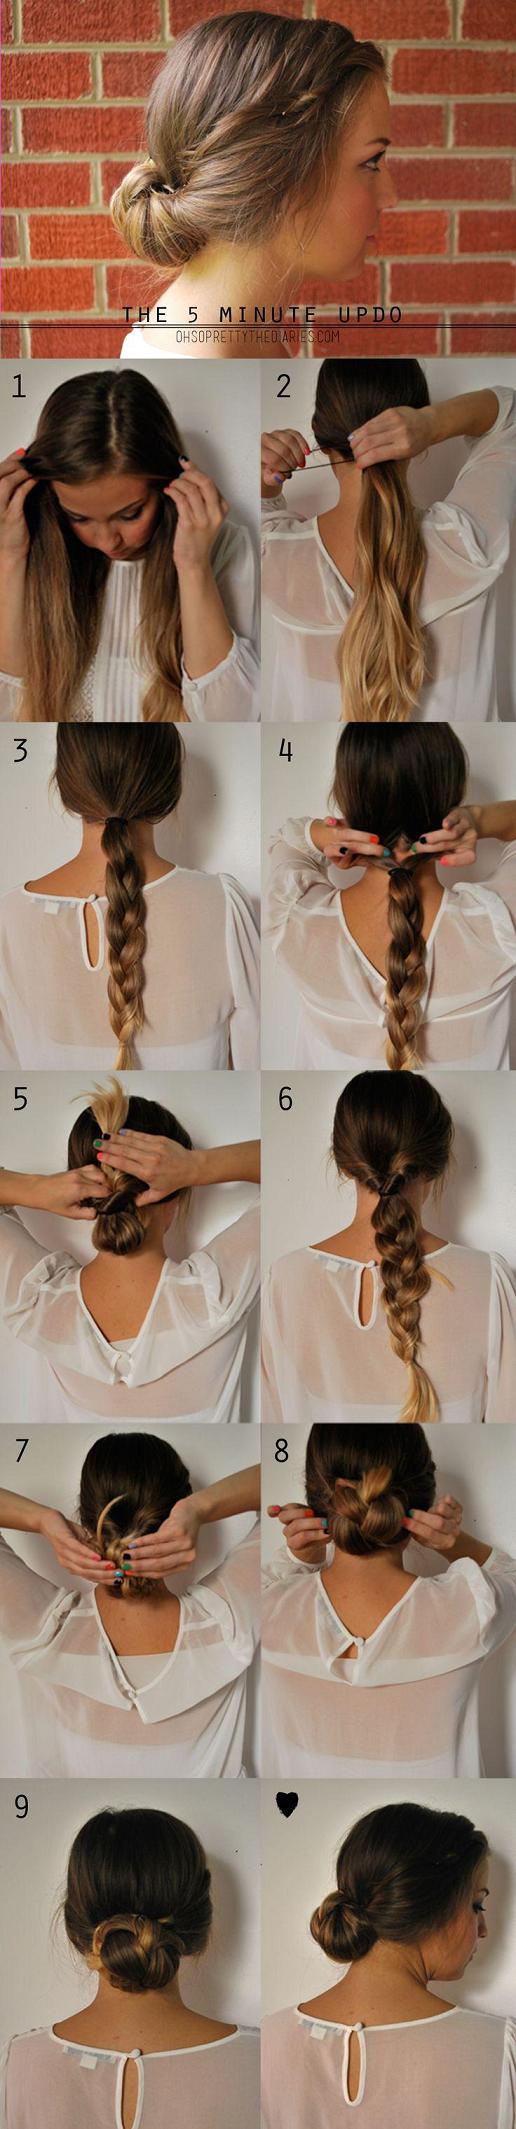 The 5 minute updo - braided gibson tuck